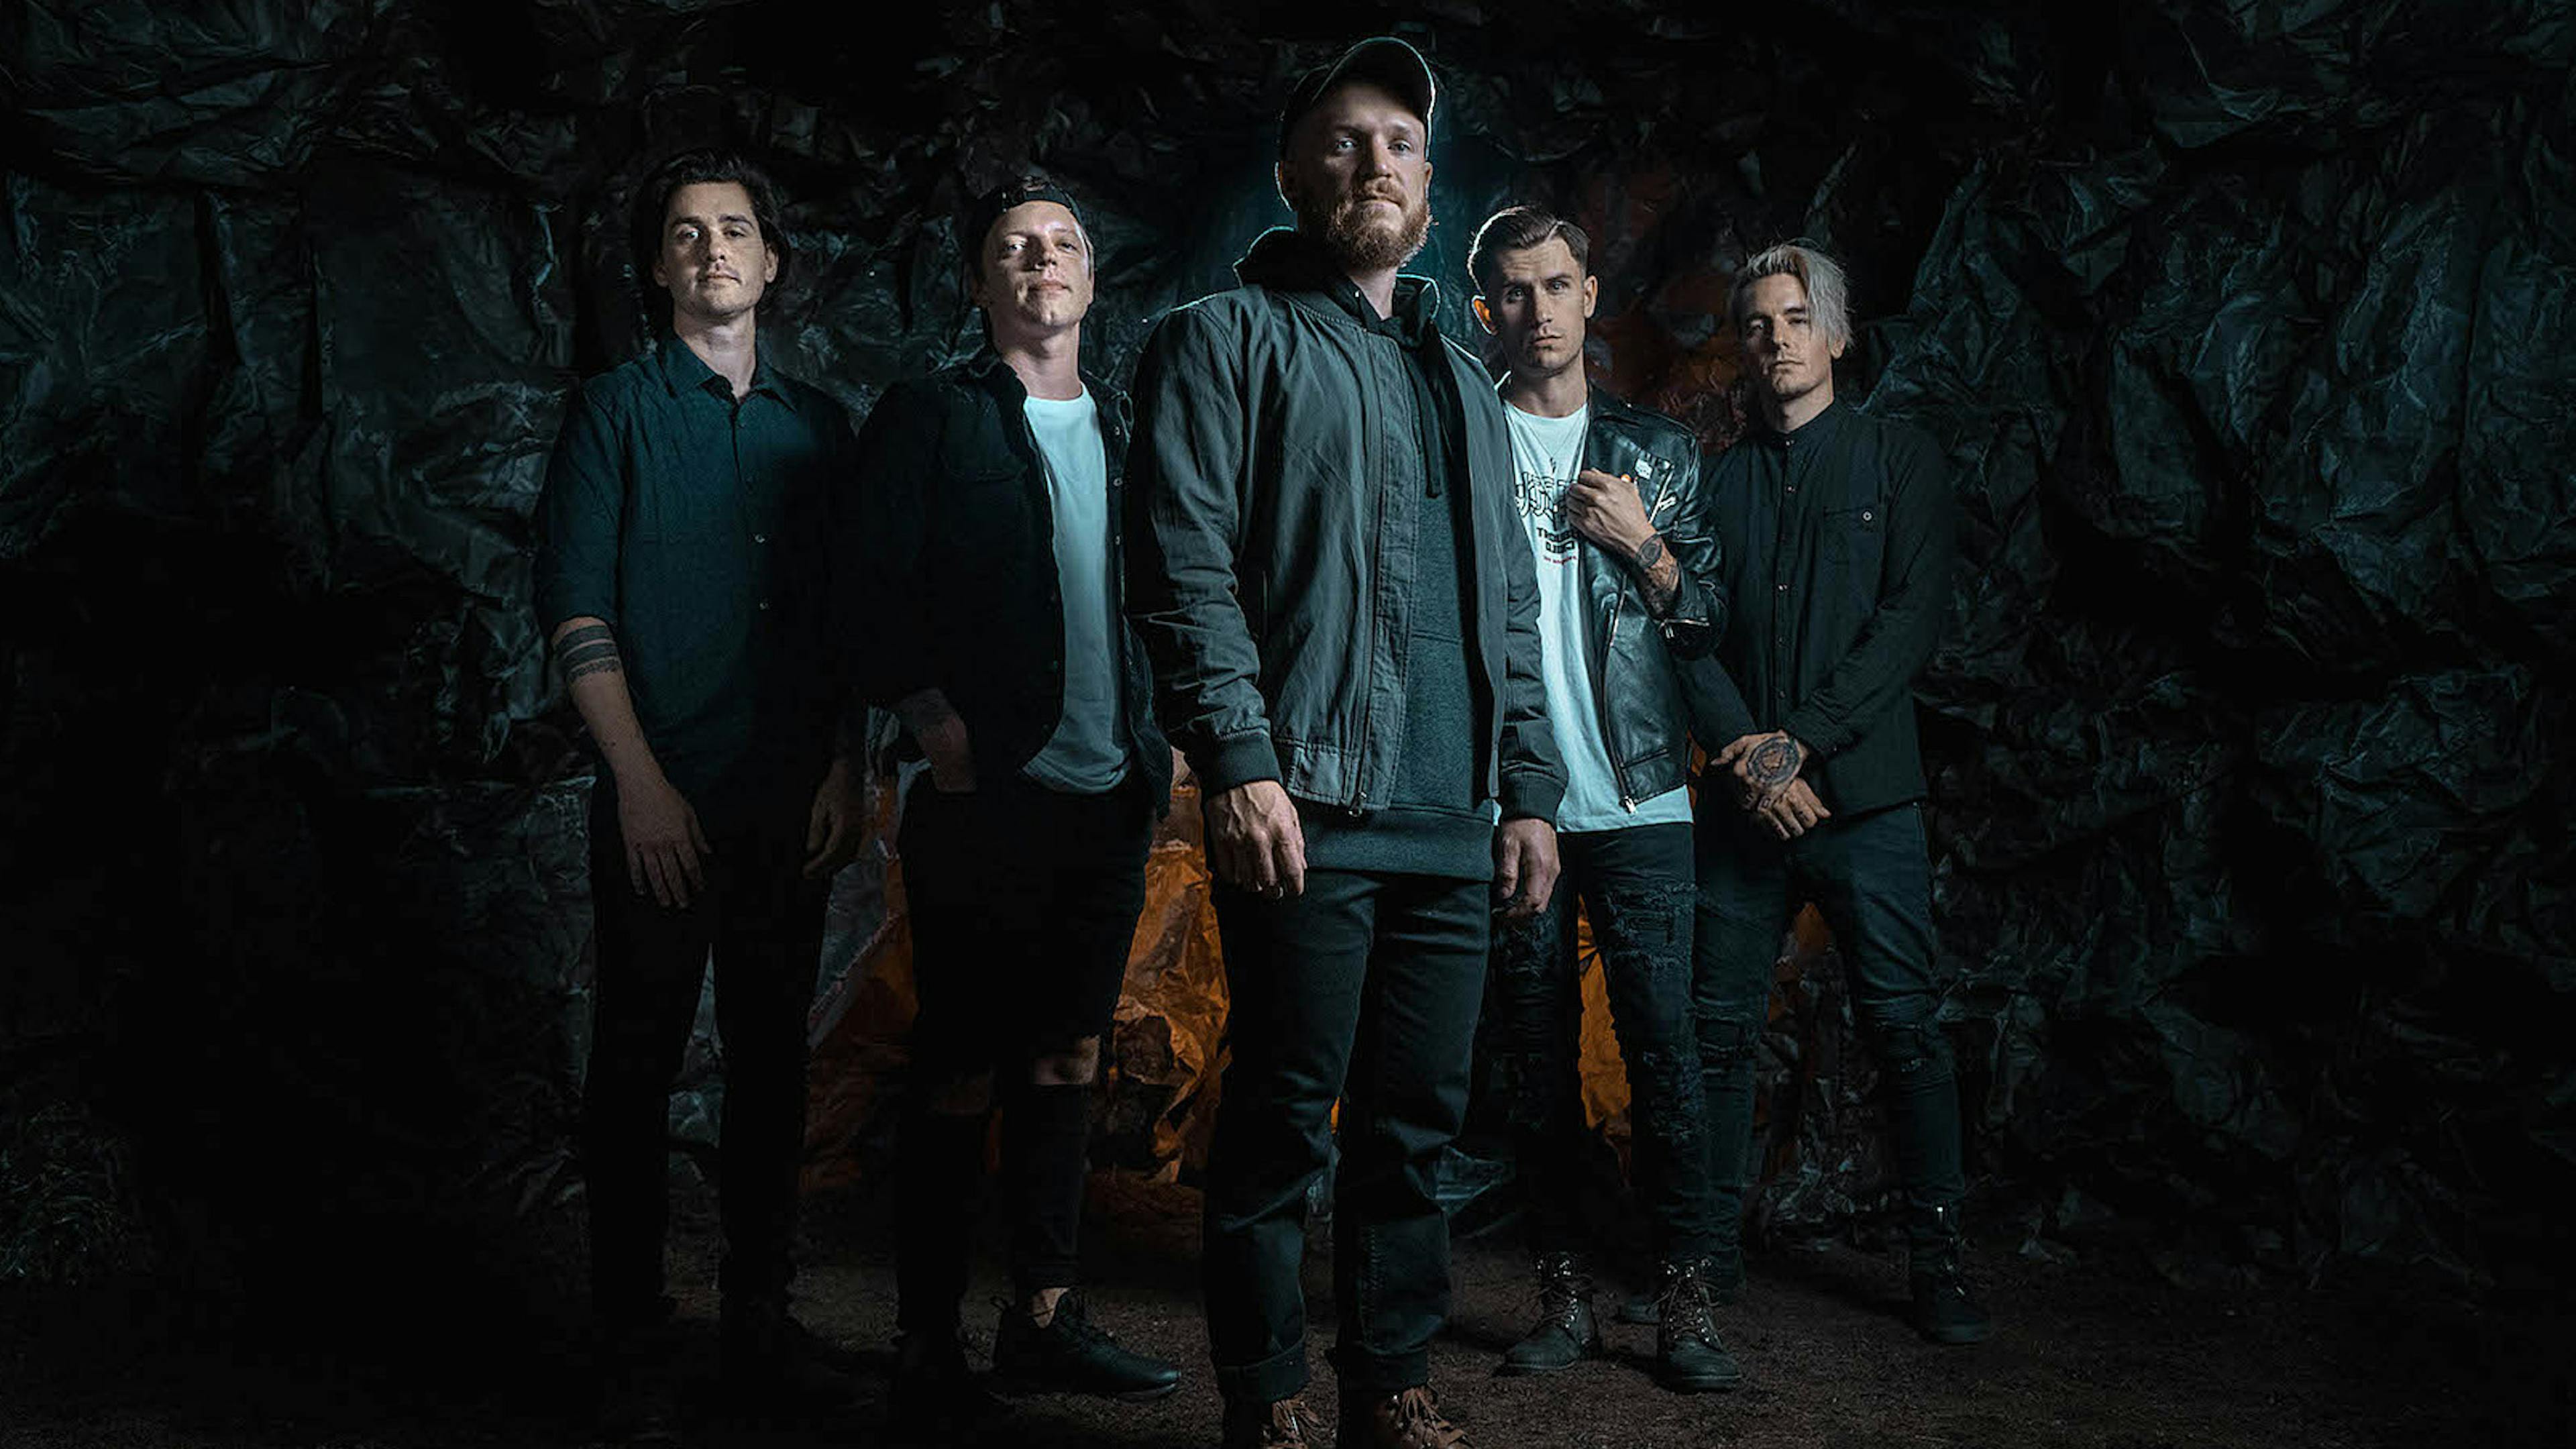 We Came As Romans hit the studio to record "banger" of a new album